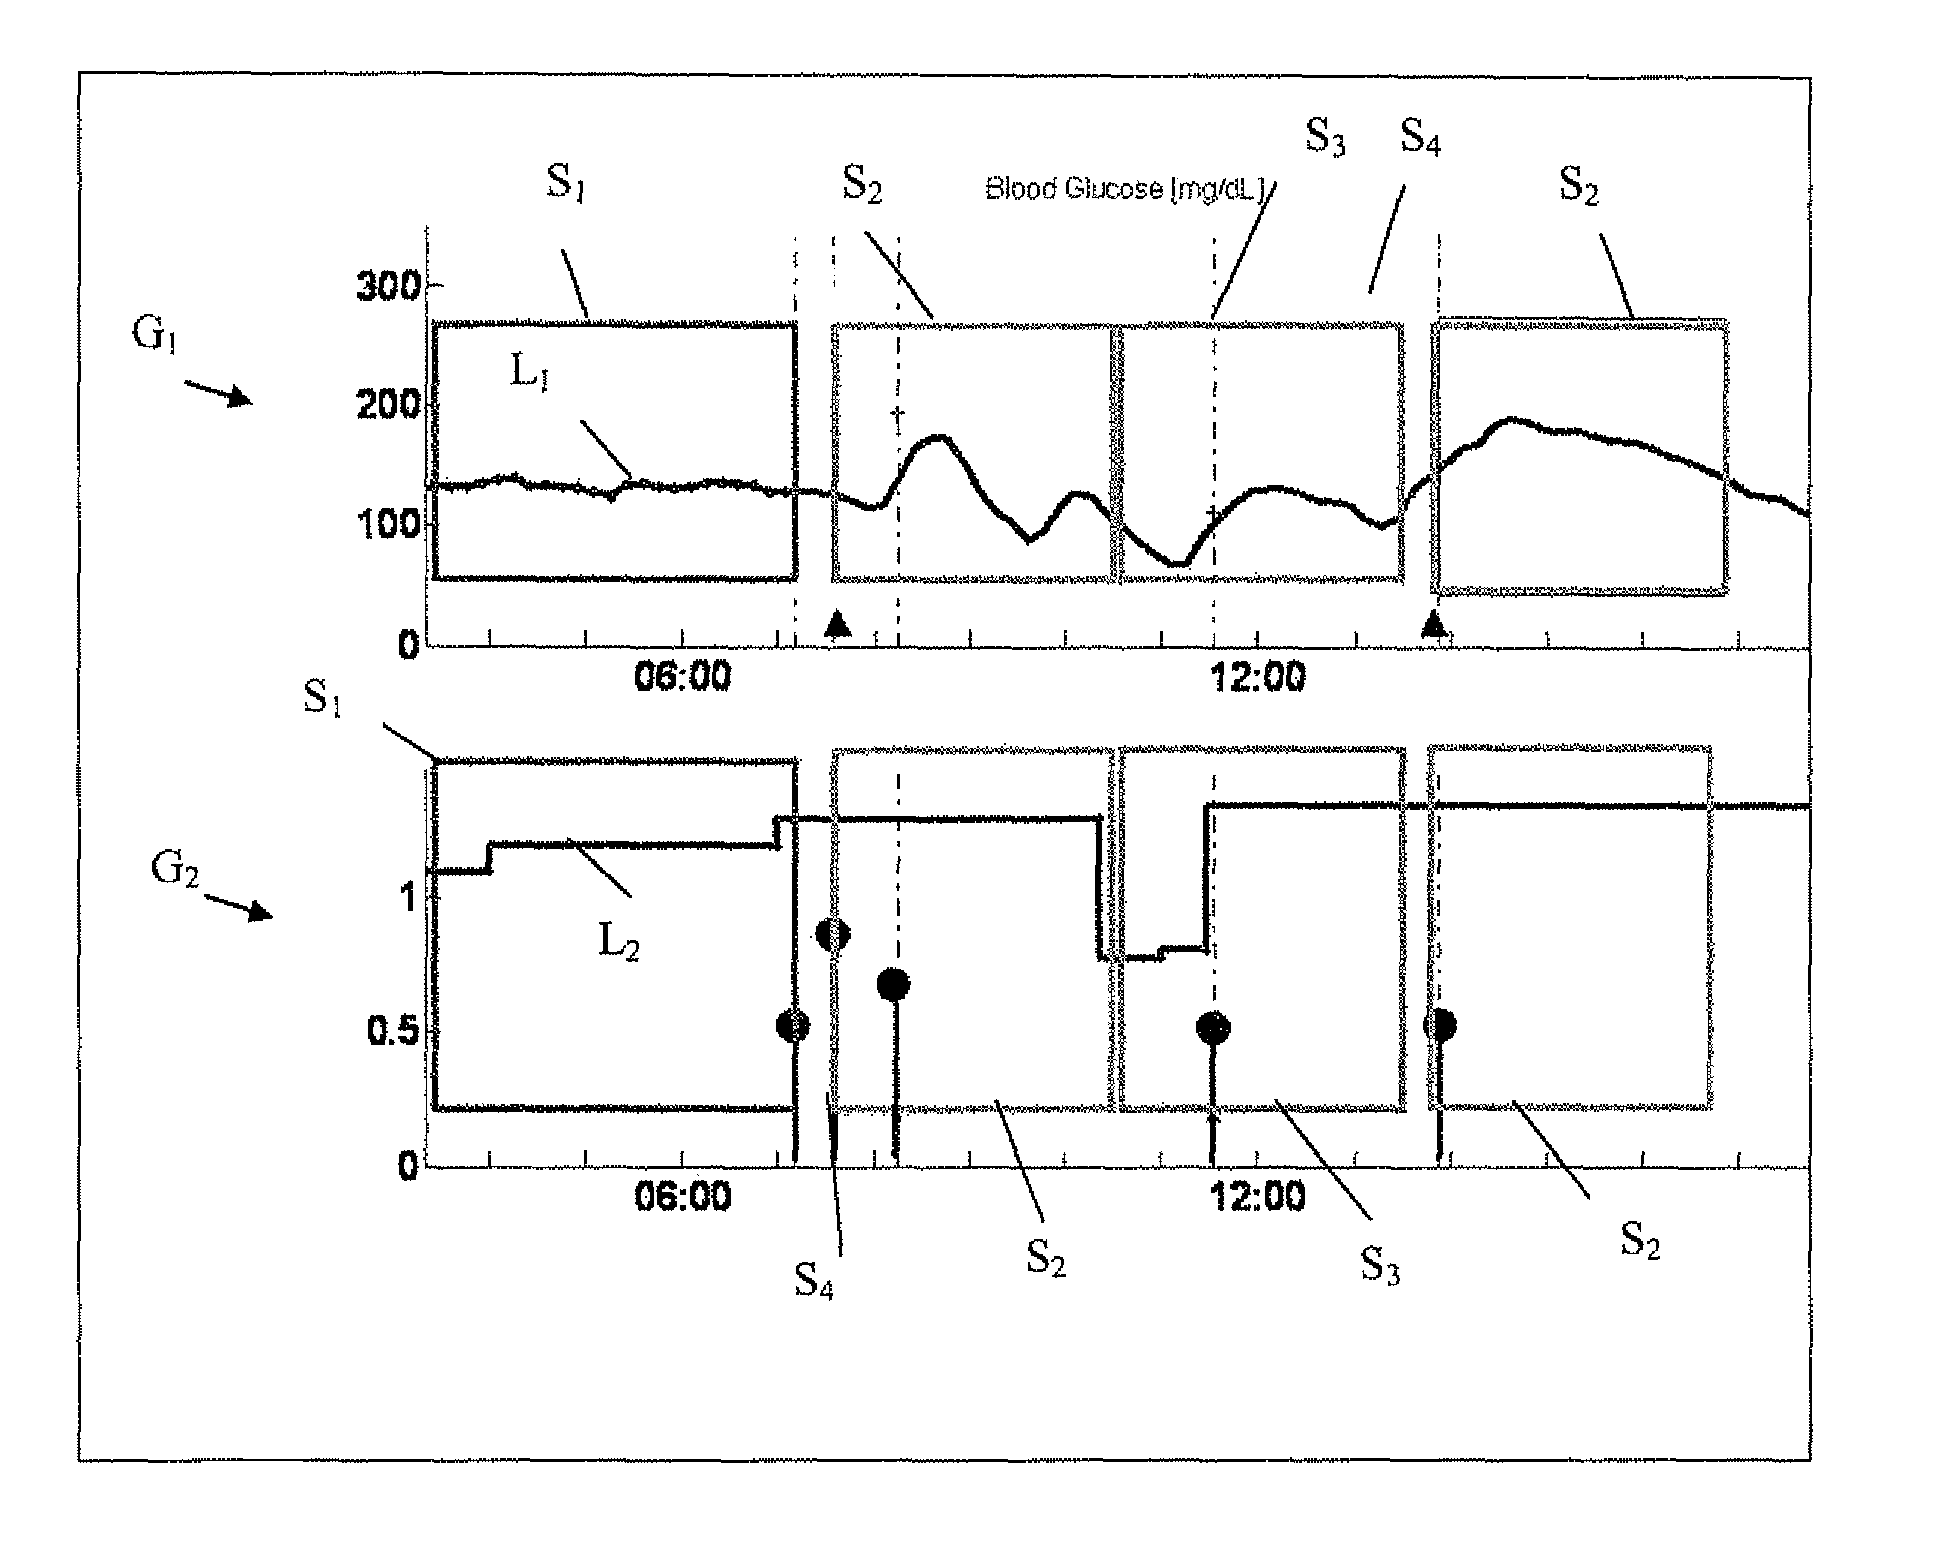 Monitoring device for management of insulin delivery